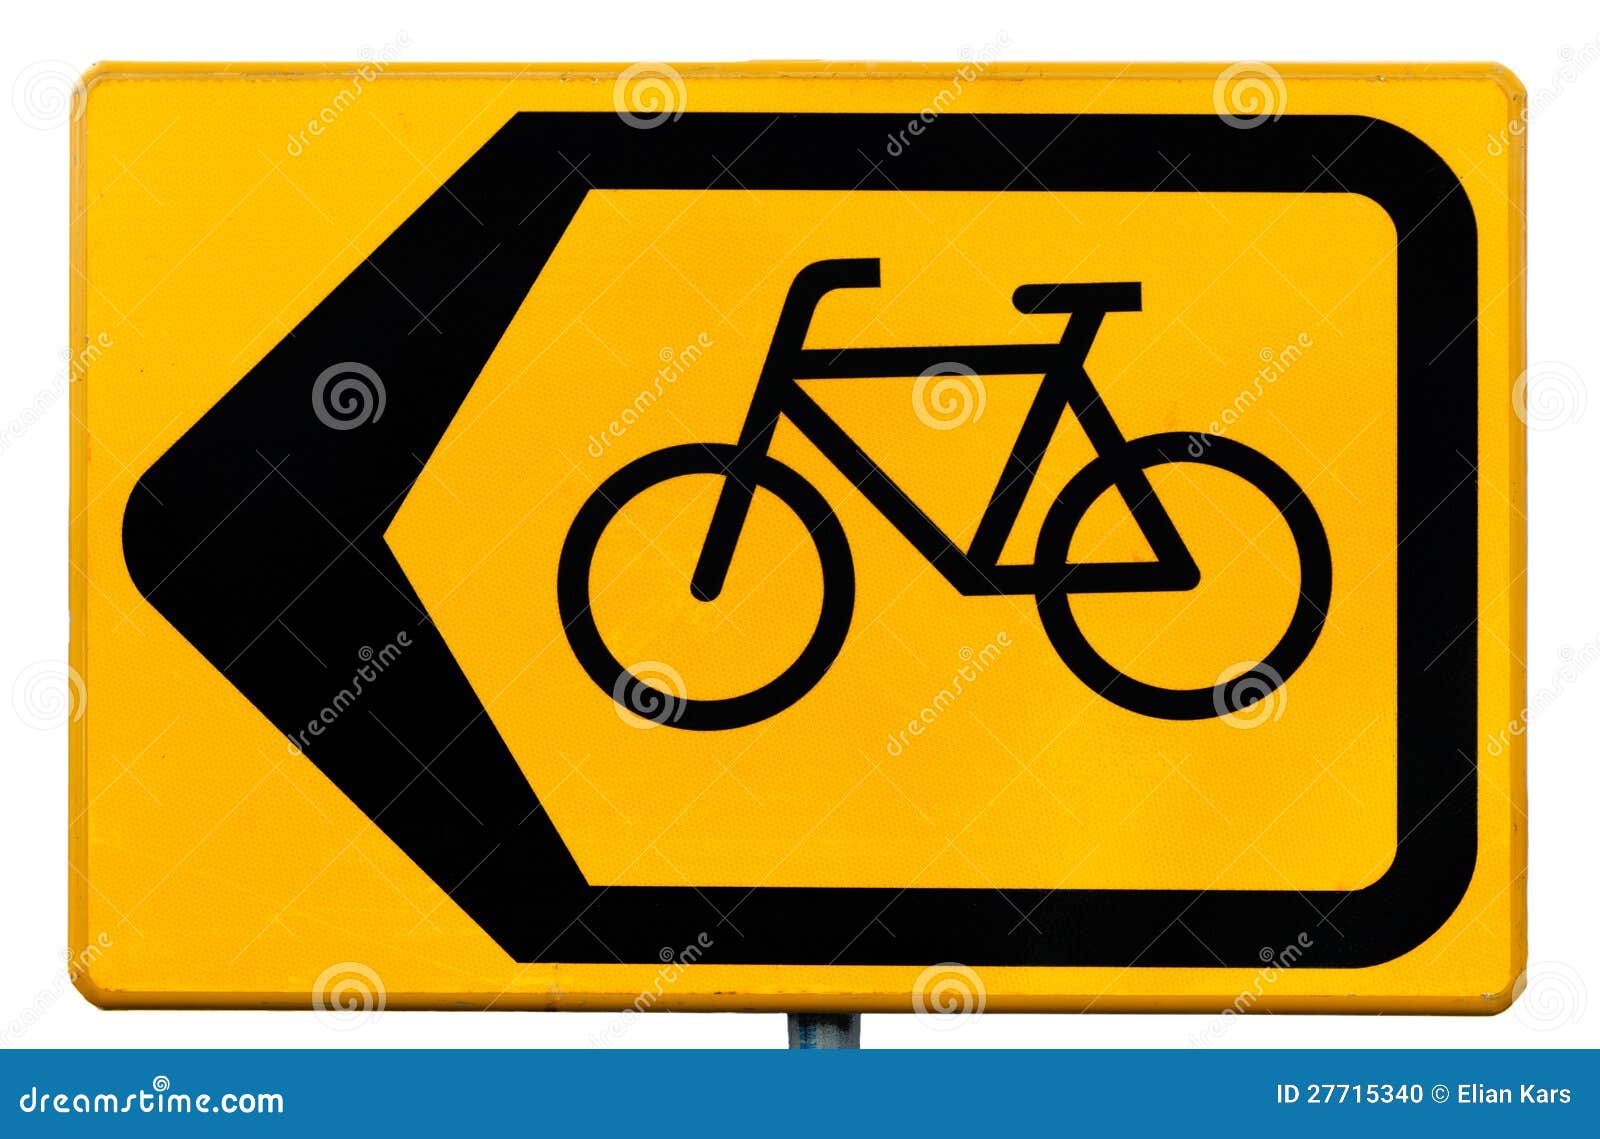 sign for cyclists indicating a traffic diversion